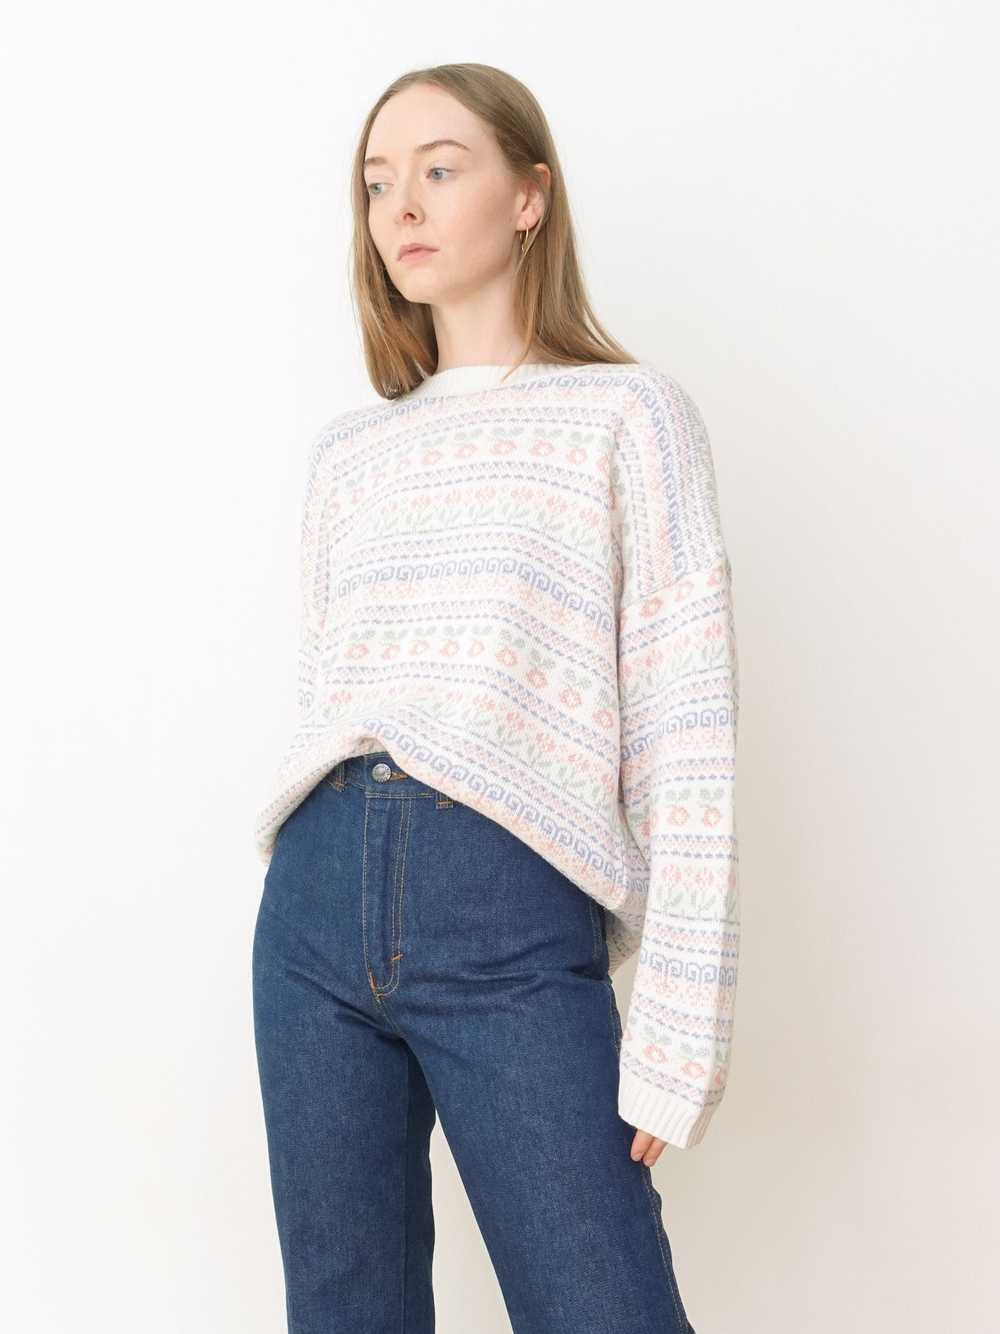 Cherry and Tulip Knit Sweater - image 1